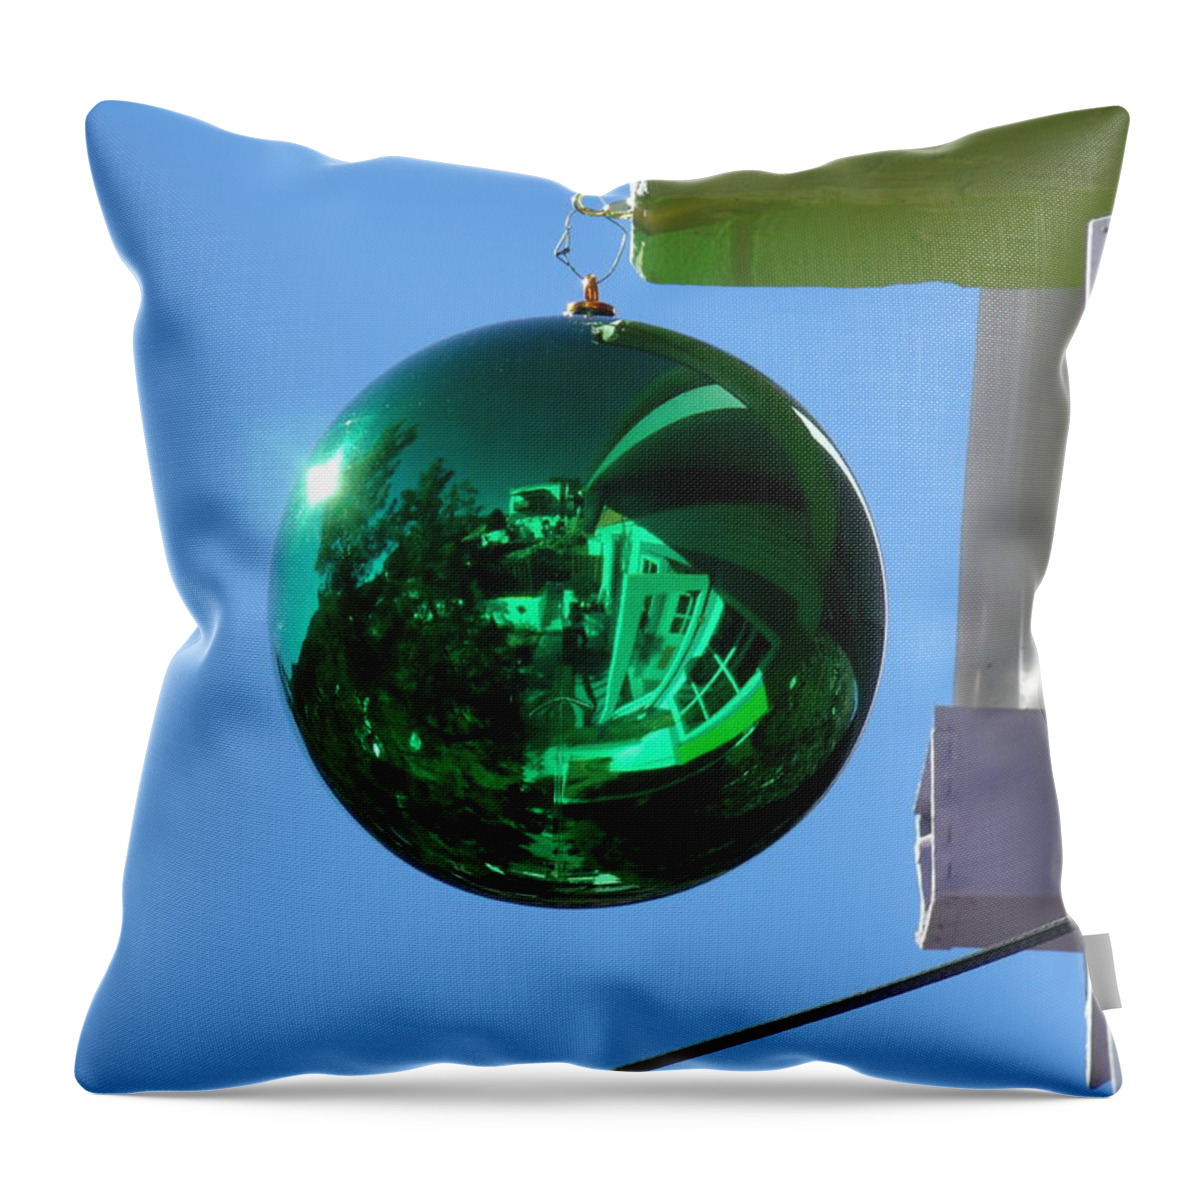 David S Reynolds Throw Pillow featuring the photograph Gazing Ball by David S Reynolds